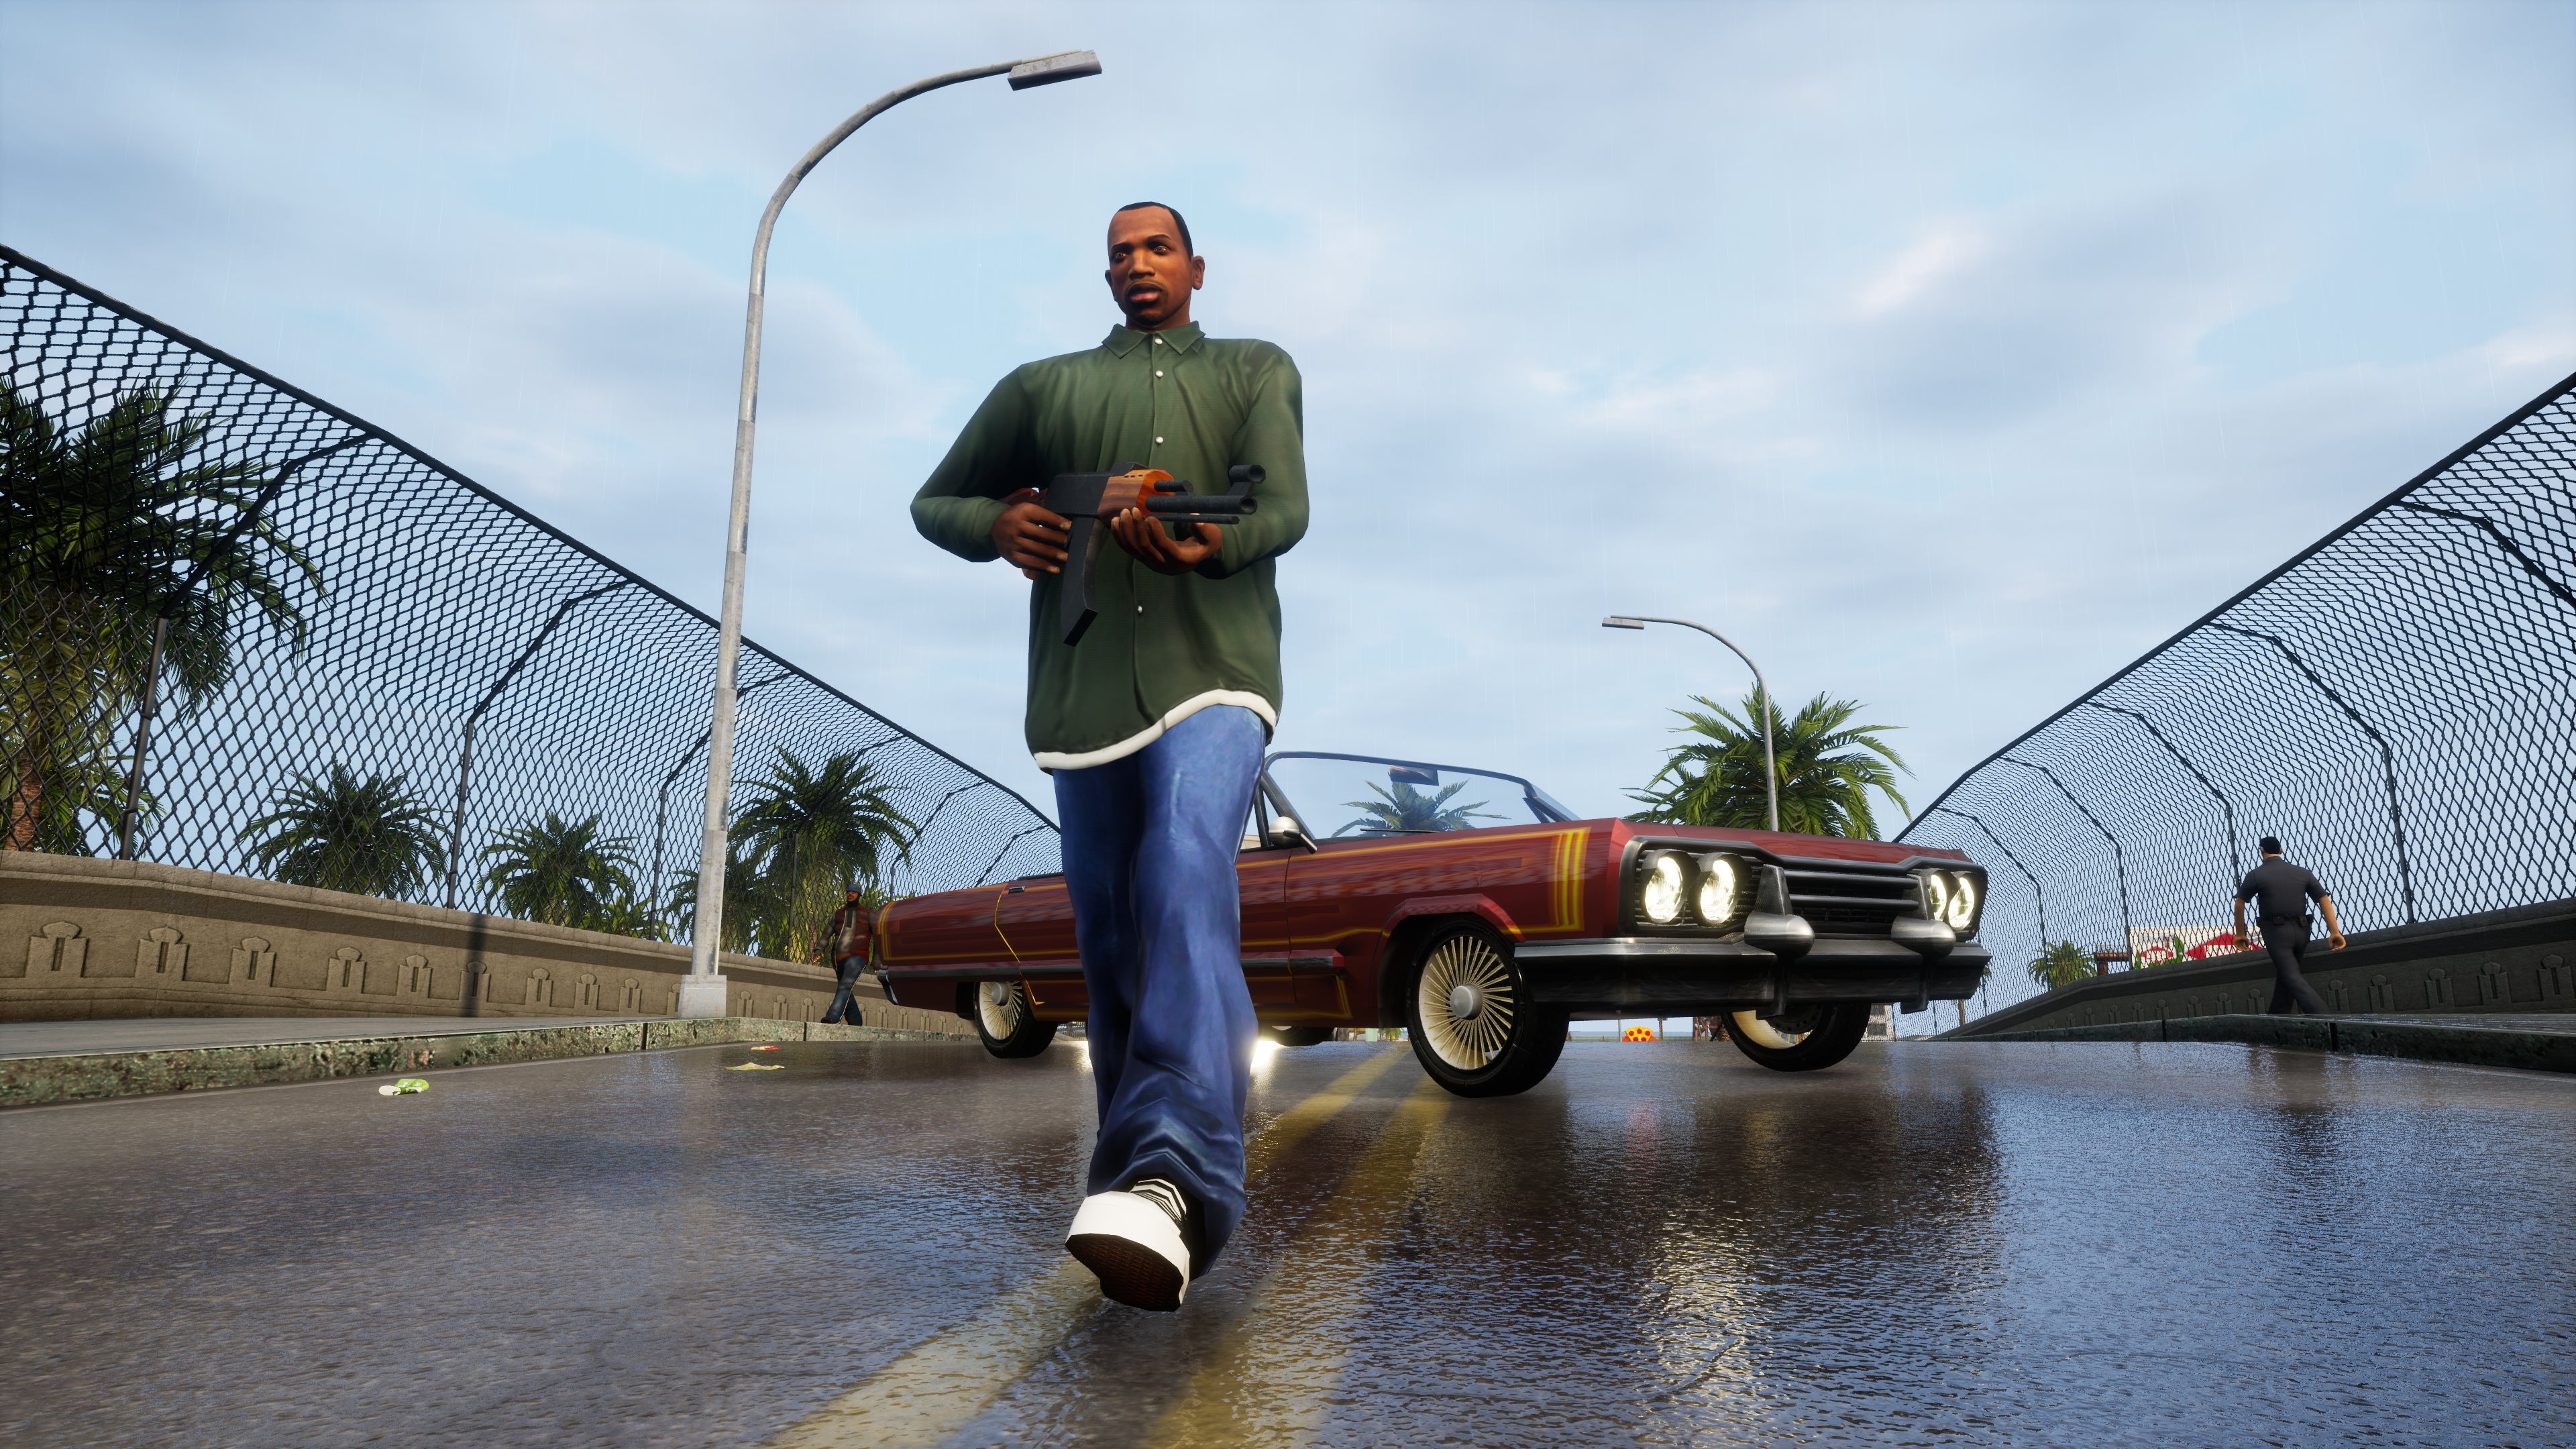 GTA Andreas - PlayStation, Xbox, PC, and Switch |